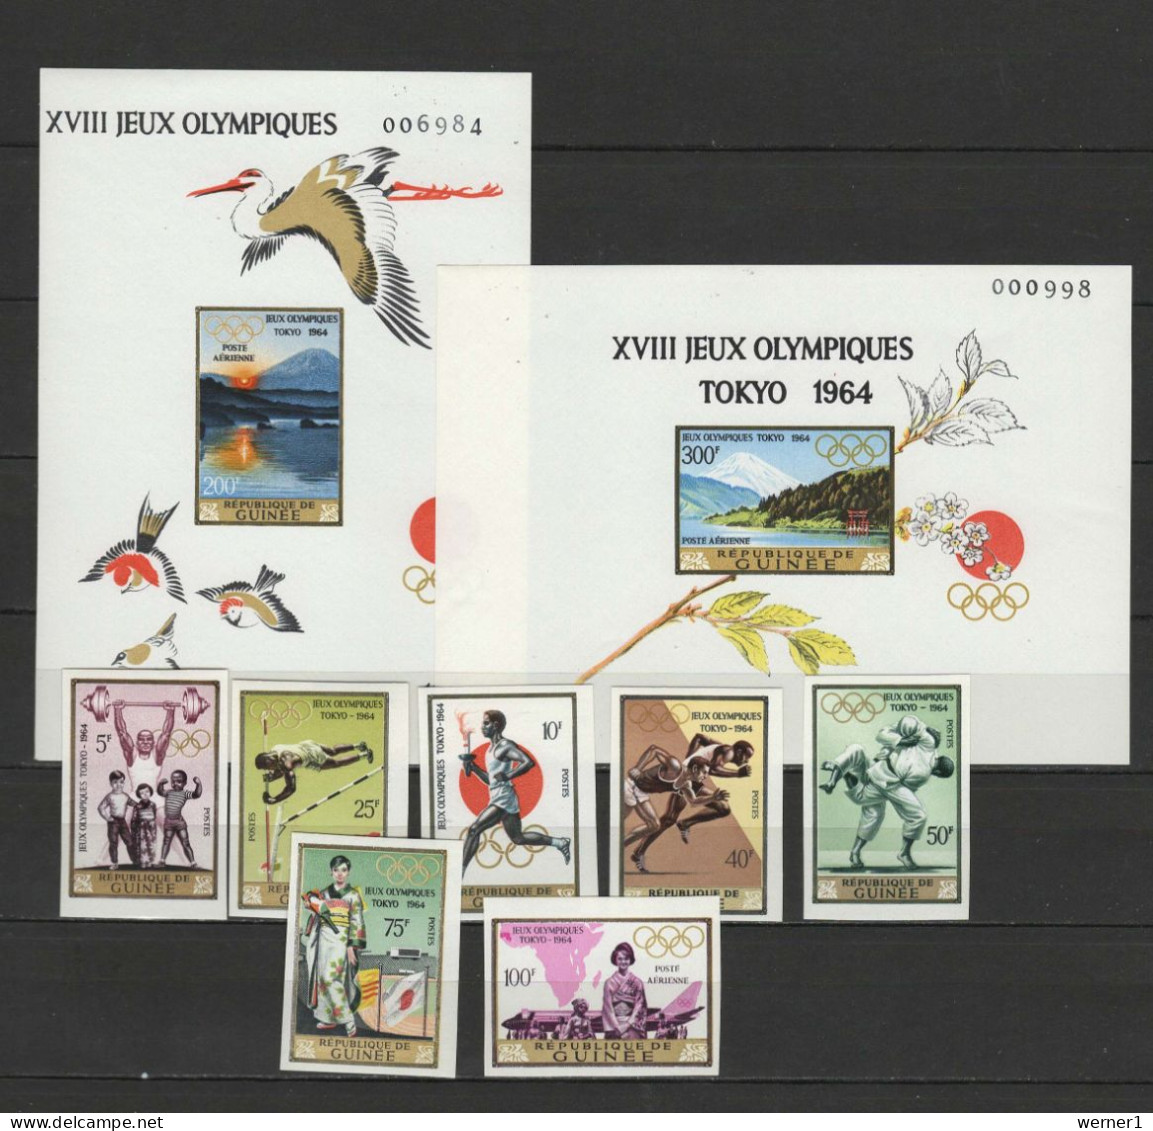 Guinea 1965 Olympic Games Tokyo, Weightlifting, Athletics, Judo Etc. Set Of 7 + 2 S/s Imperf. MNH -scarce- - Ete 1964: Tokyo